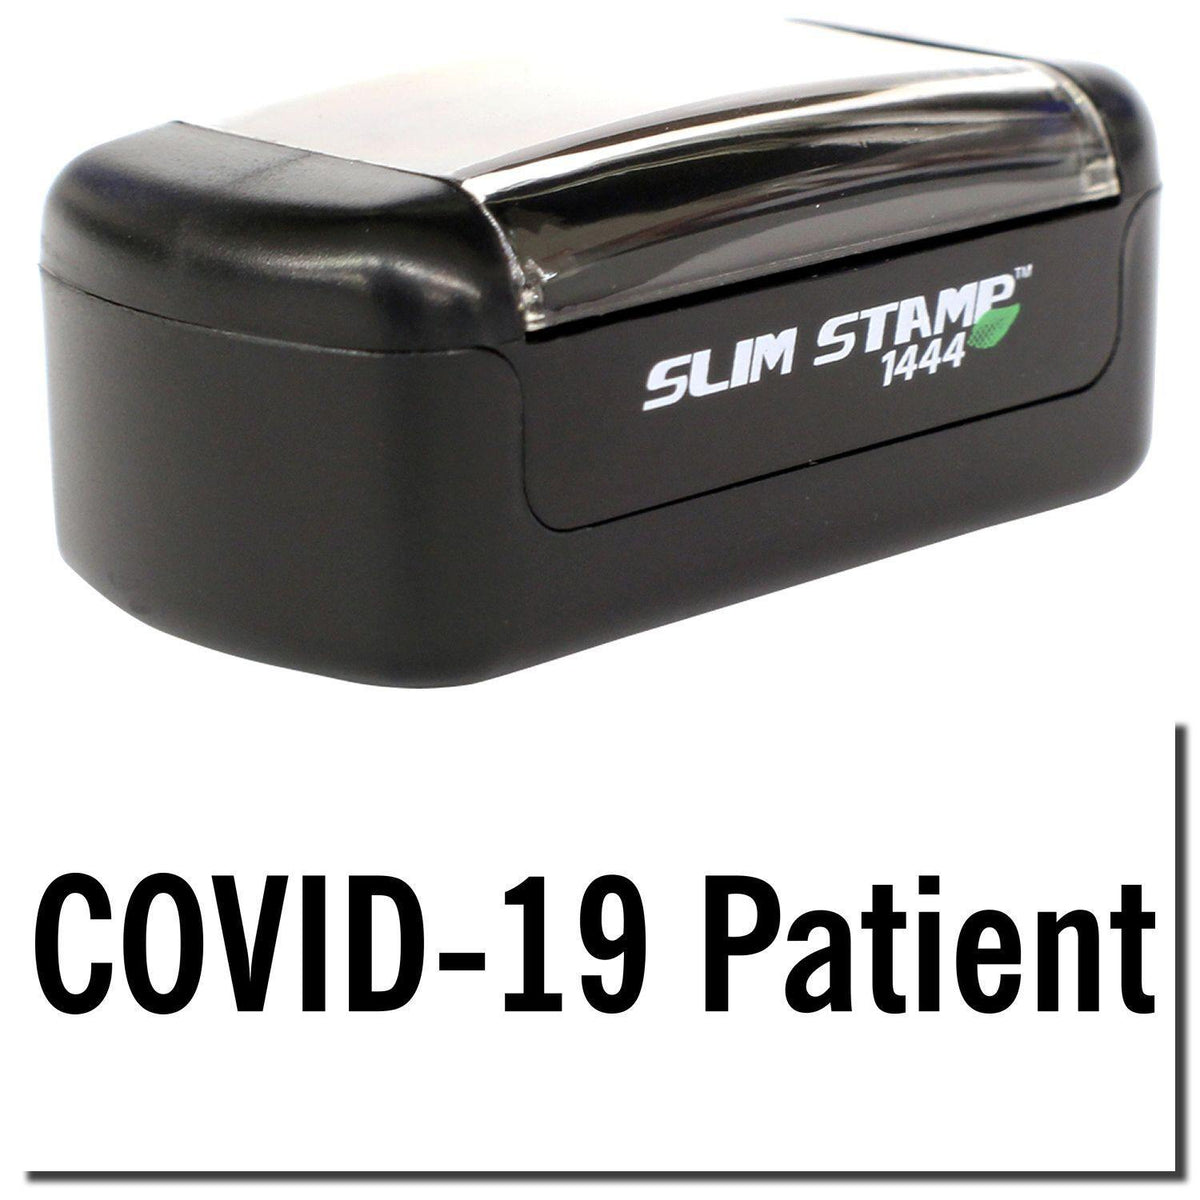 A stock office pre-inked stamp with a stamped image showing how the text &quot;COVID-19 Patient&quot; is displayed after stamping.